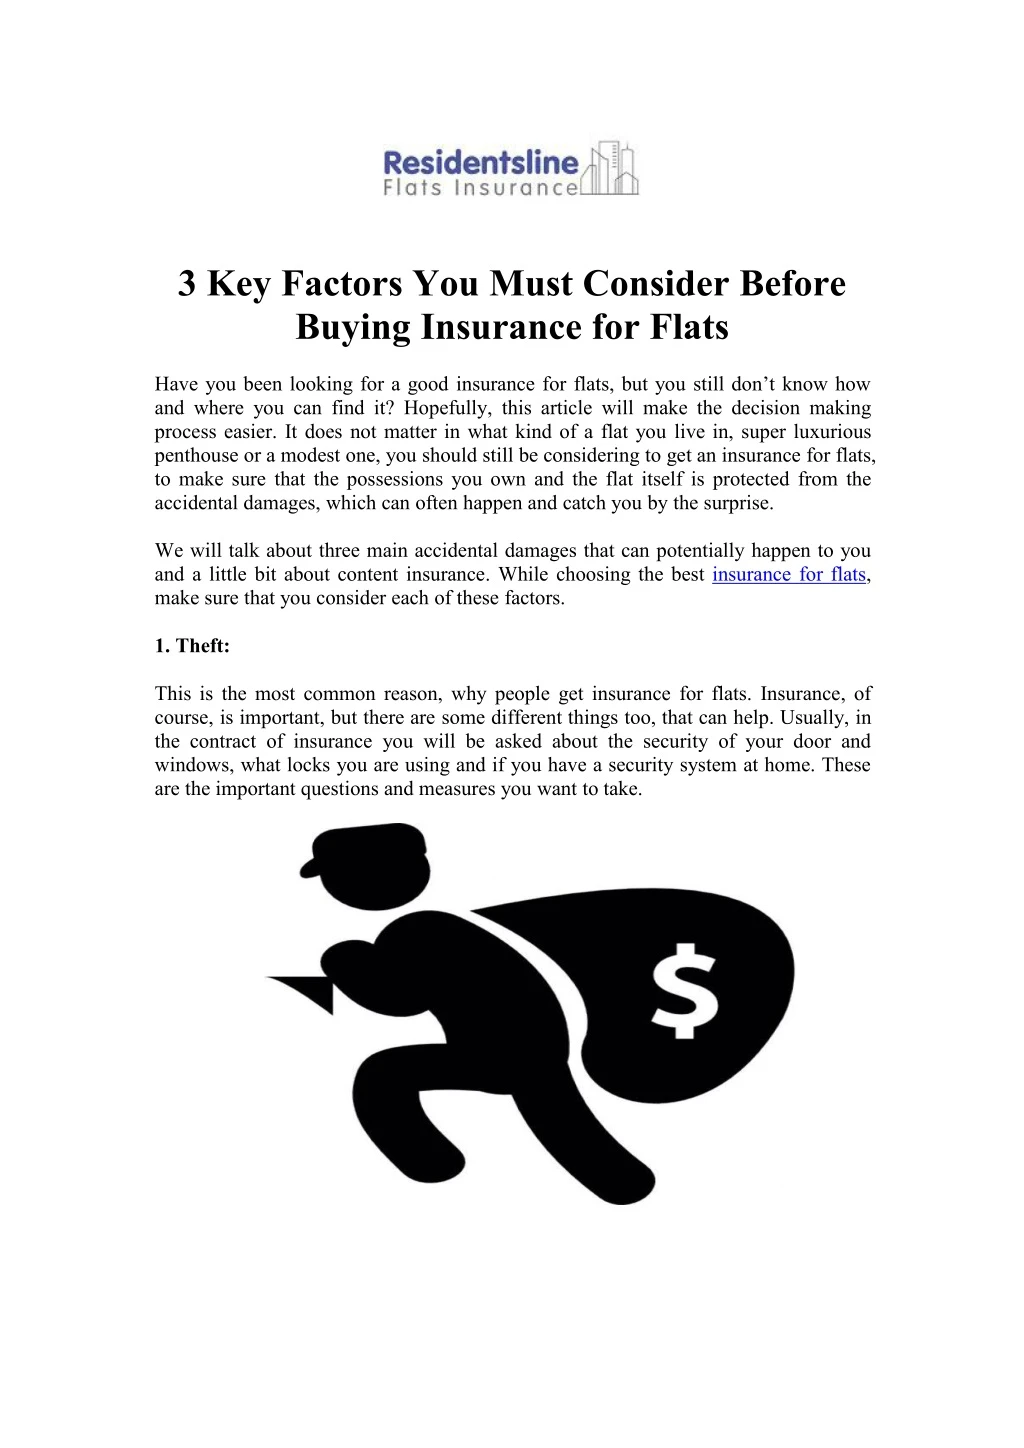 3 key factors you must consider before buying